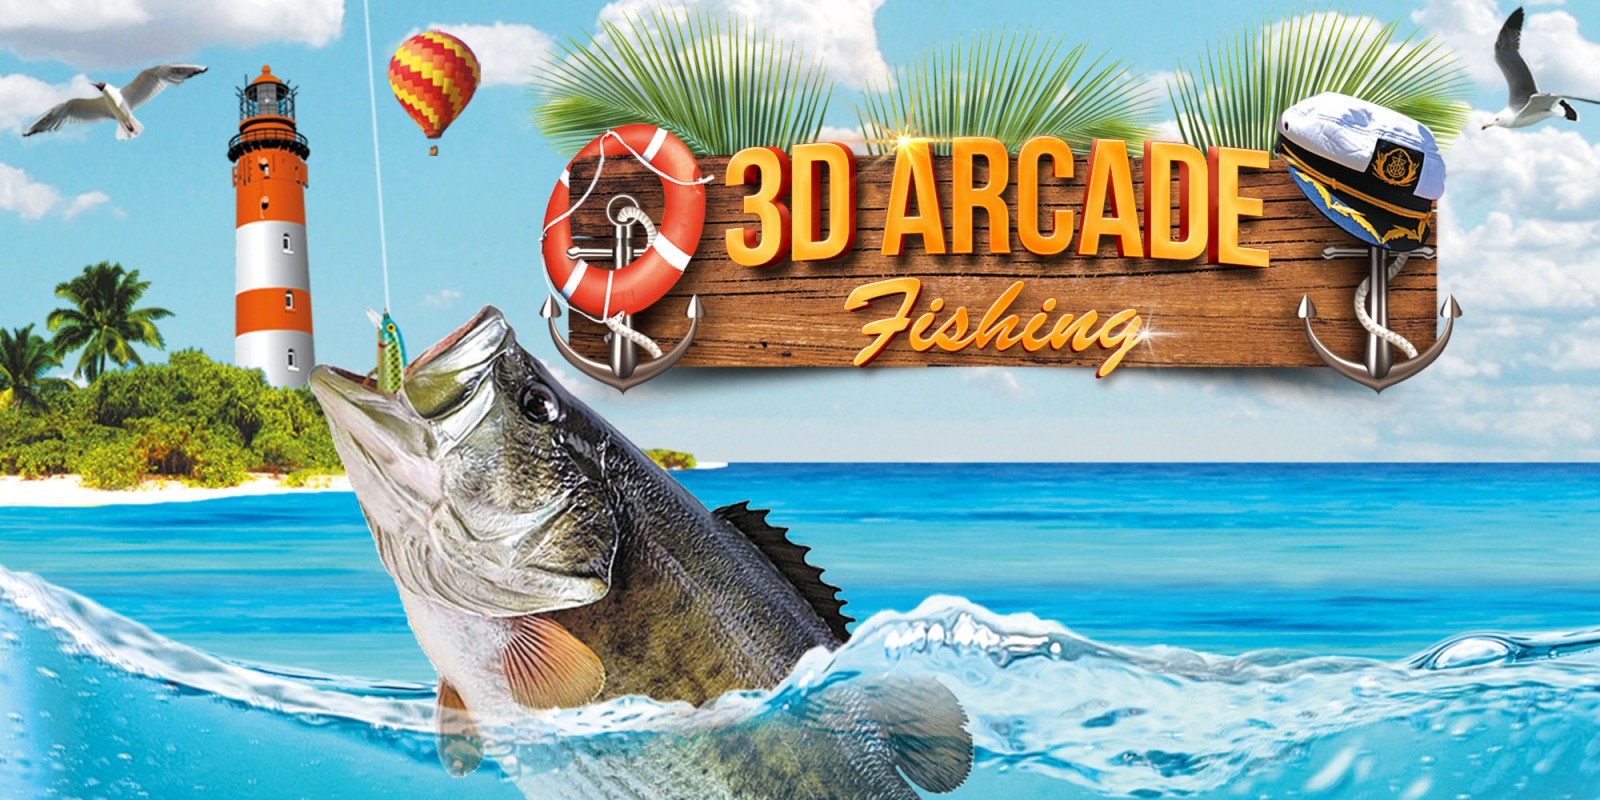 instal the last version for android Arcade Fishing